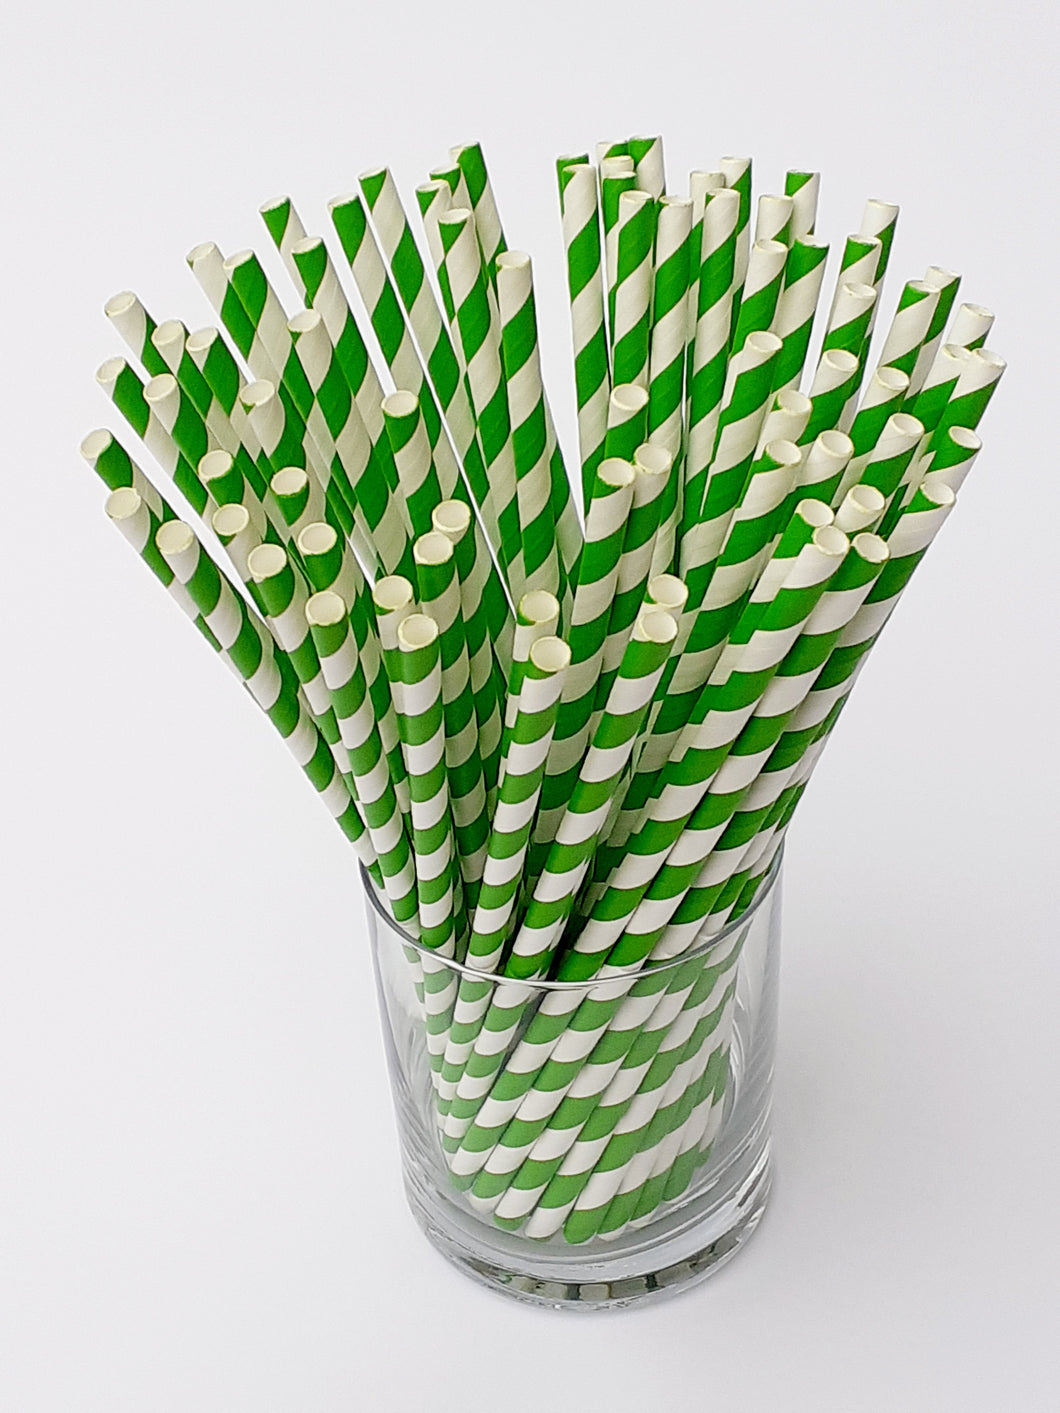 Green stripe paper straws made in UK. Our biodegradable eco friendly paper straws are recyclable with a low carbon footprint. Say no to plastic – our planet matters.